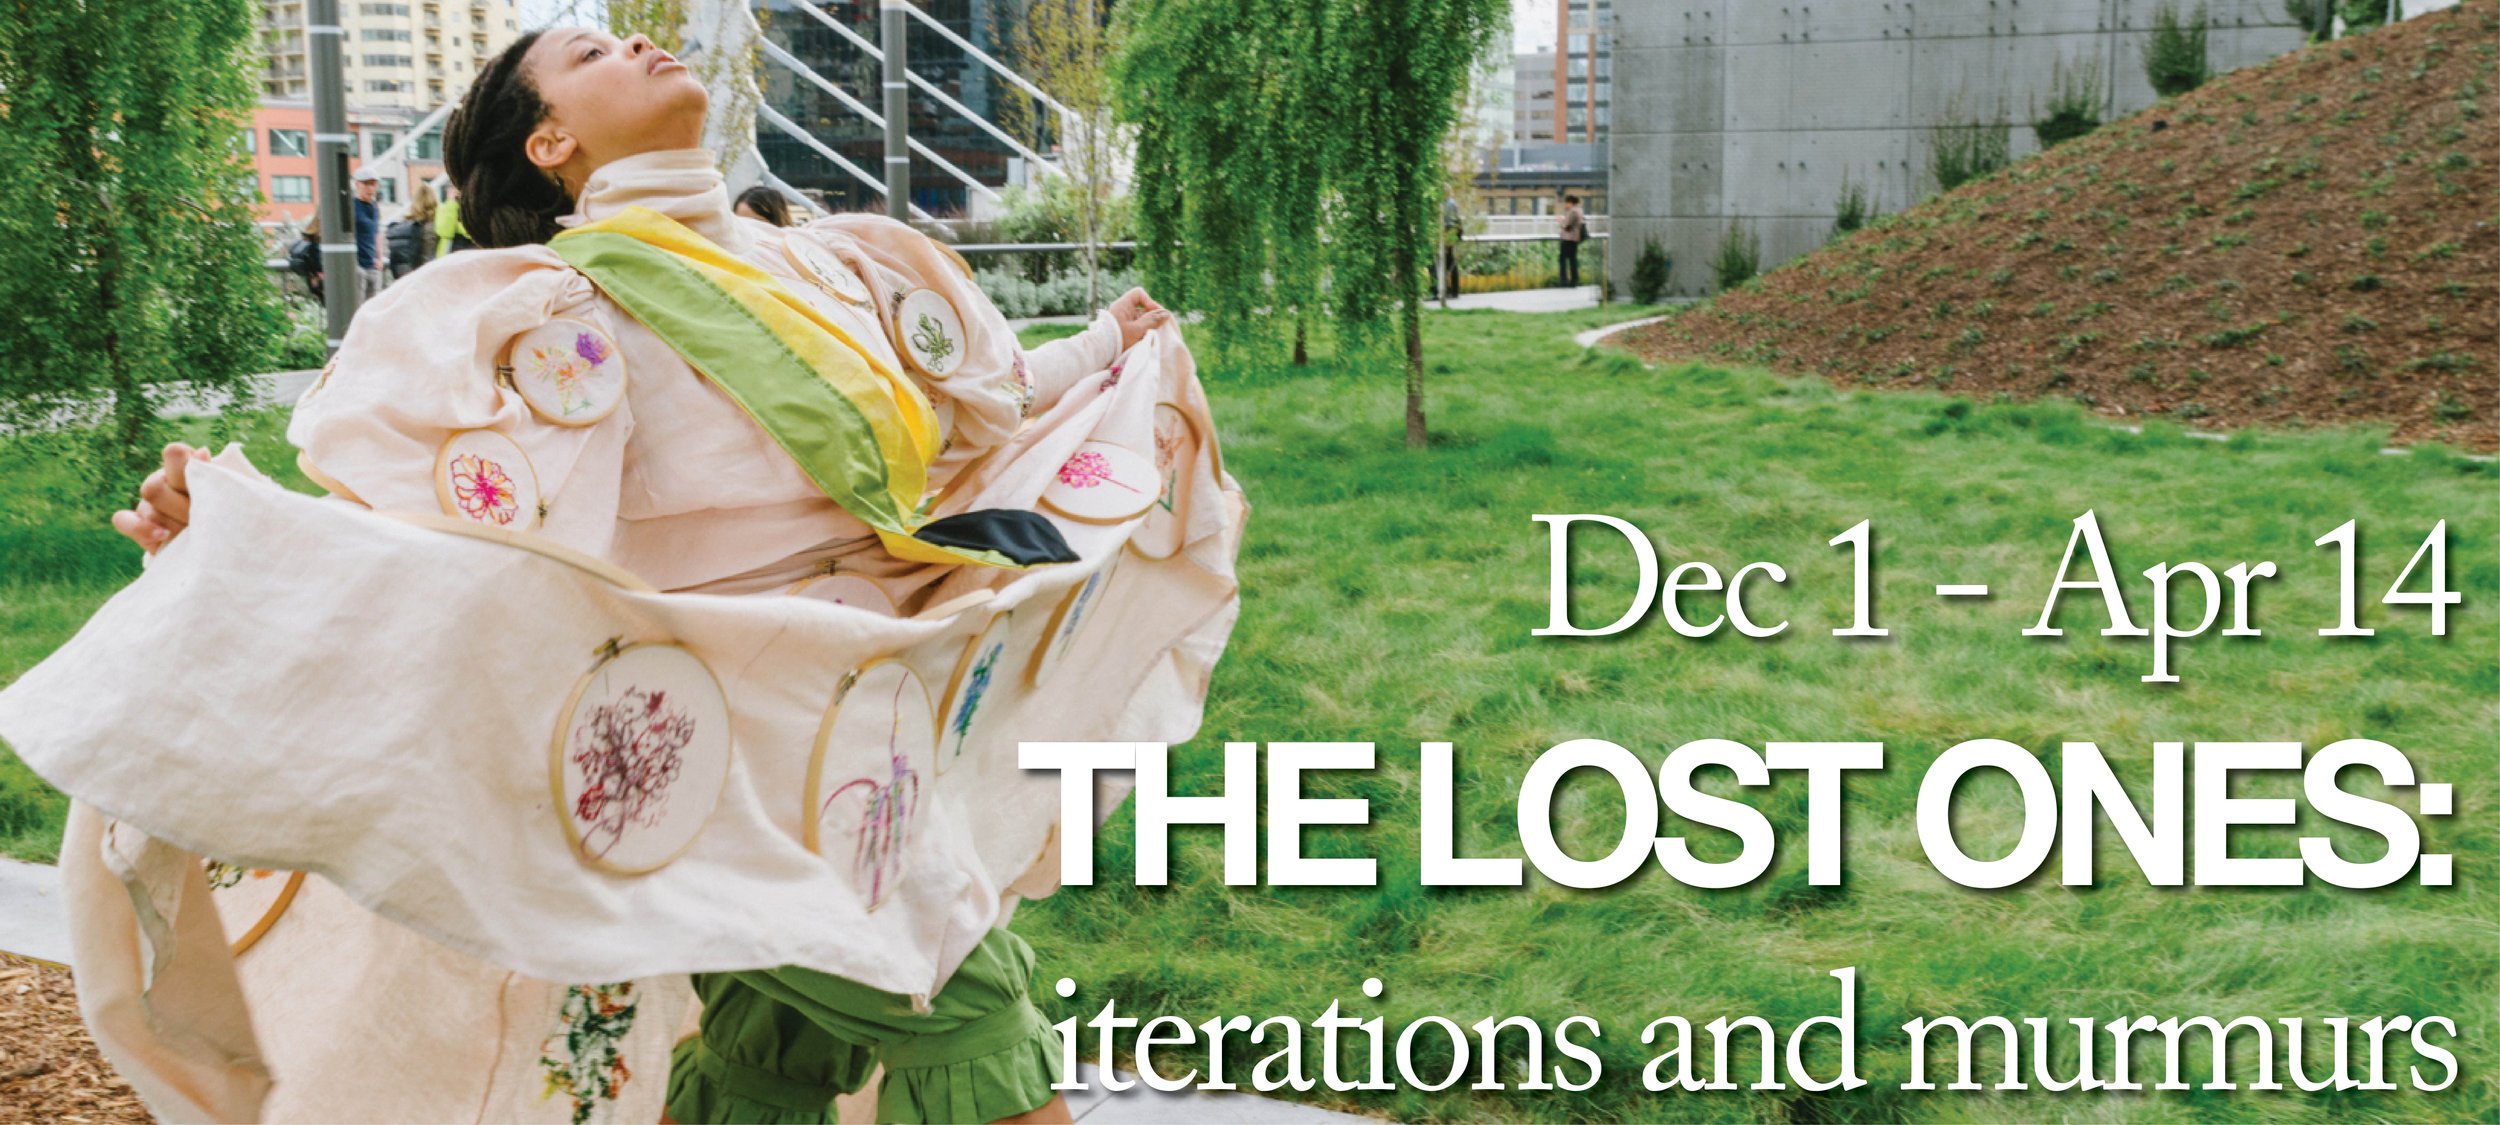 Dec 1 - Apr 14, the lost ones, iterations and murmurs